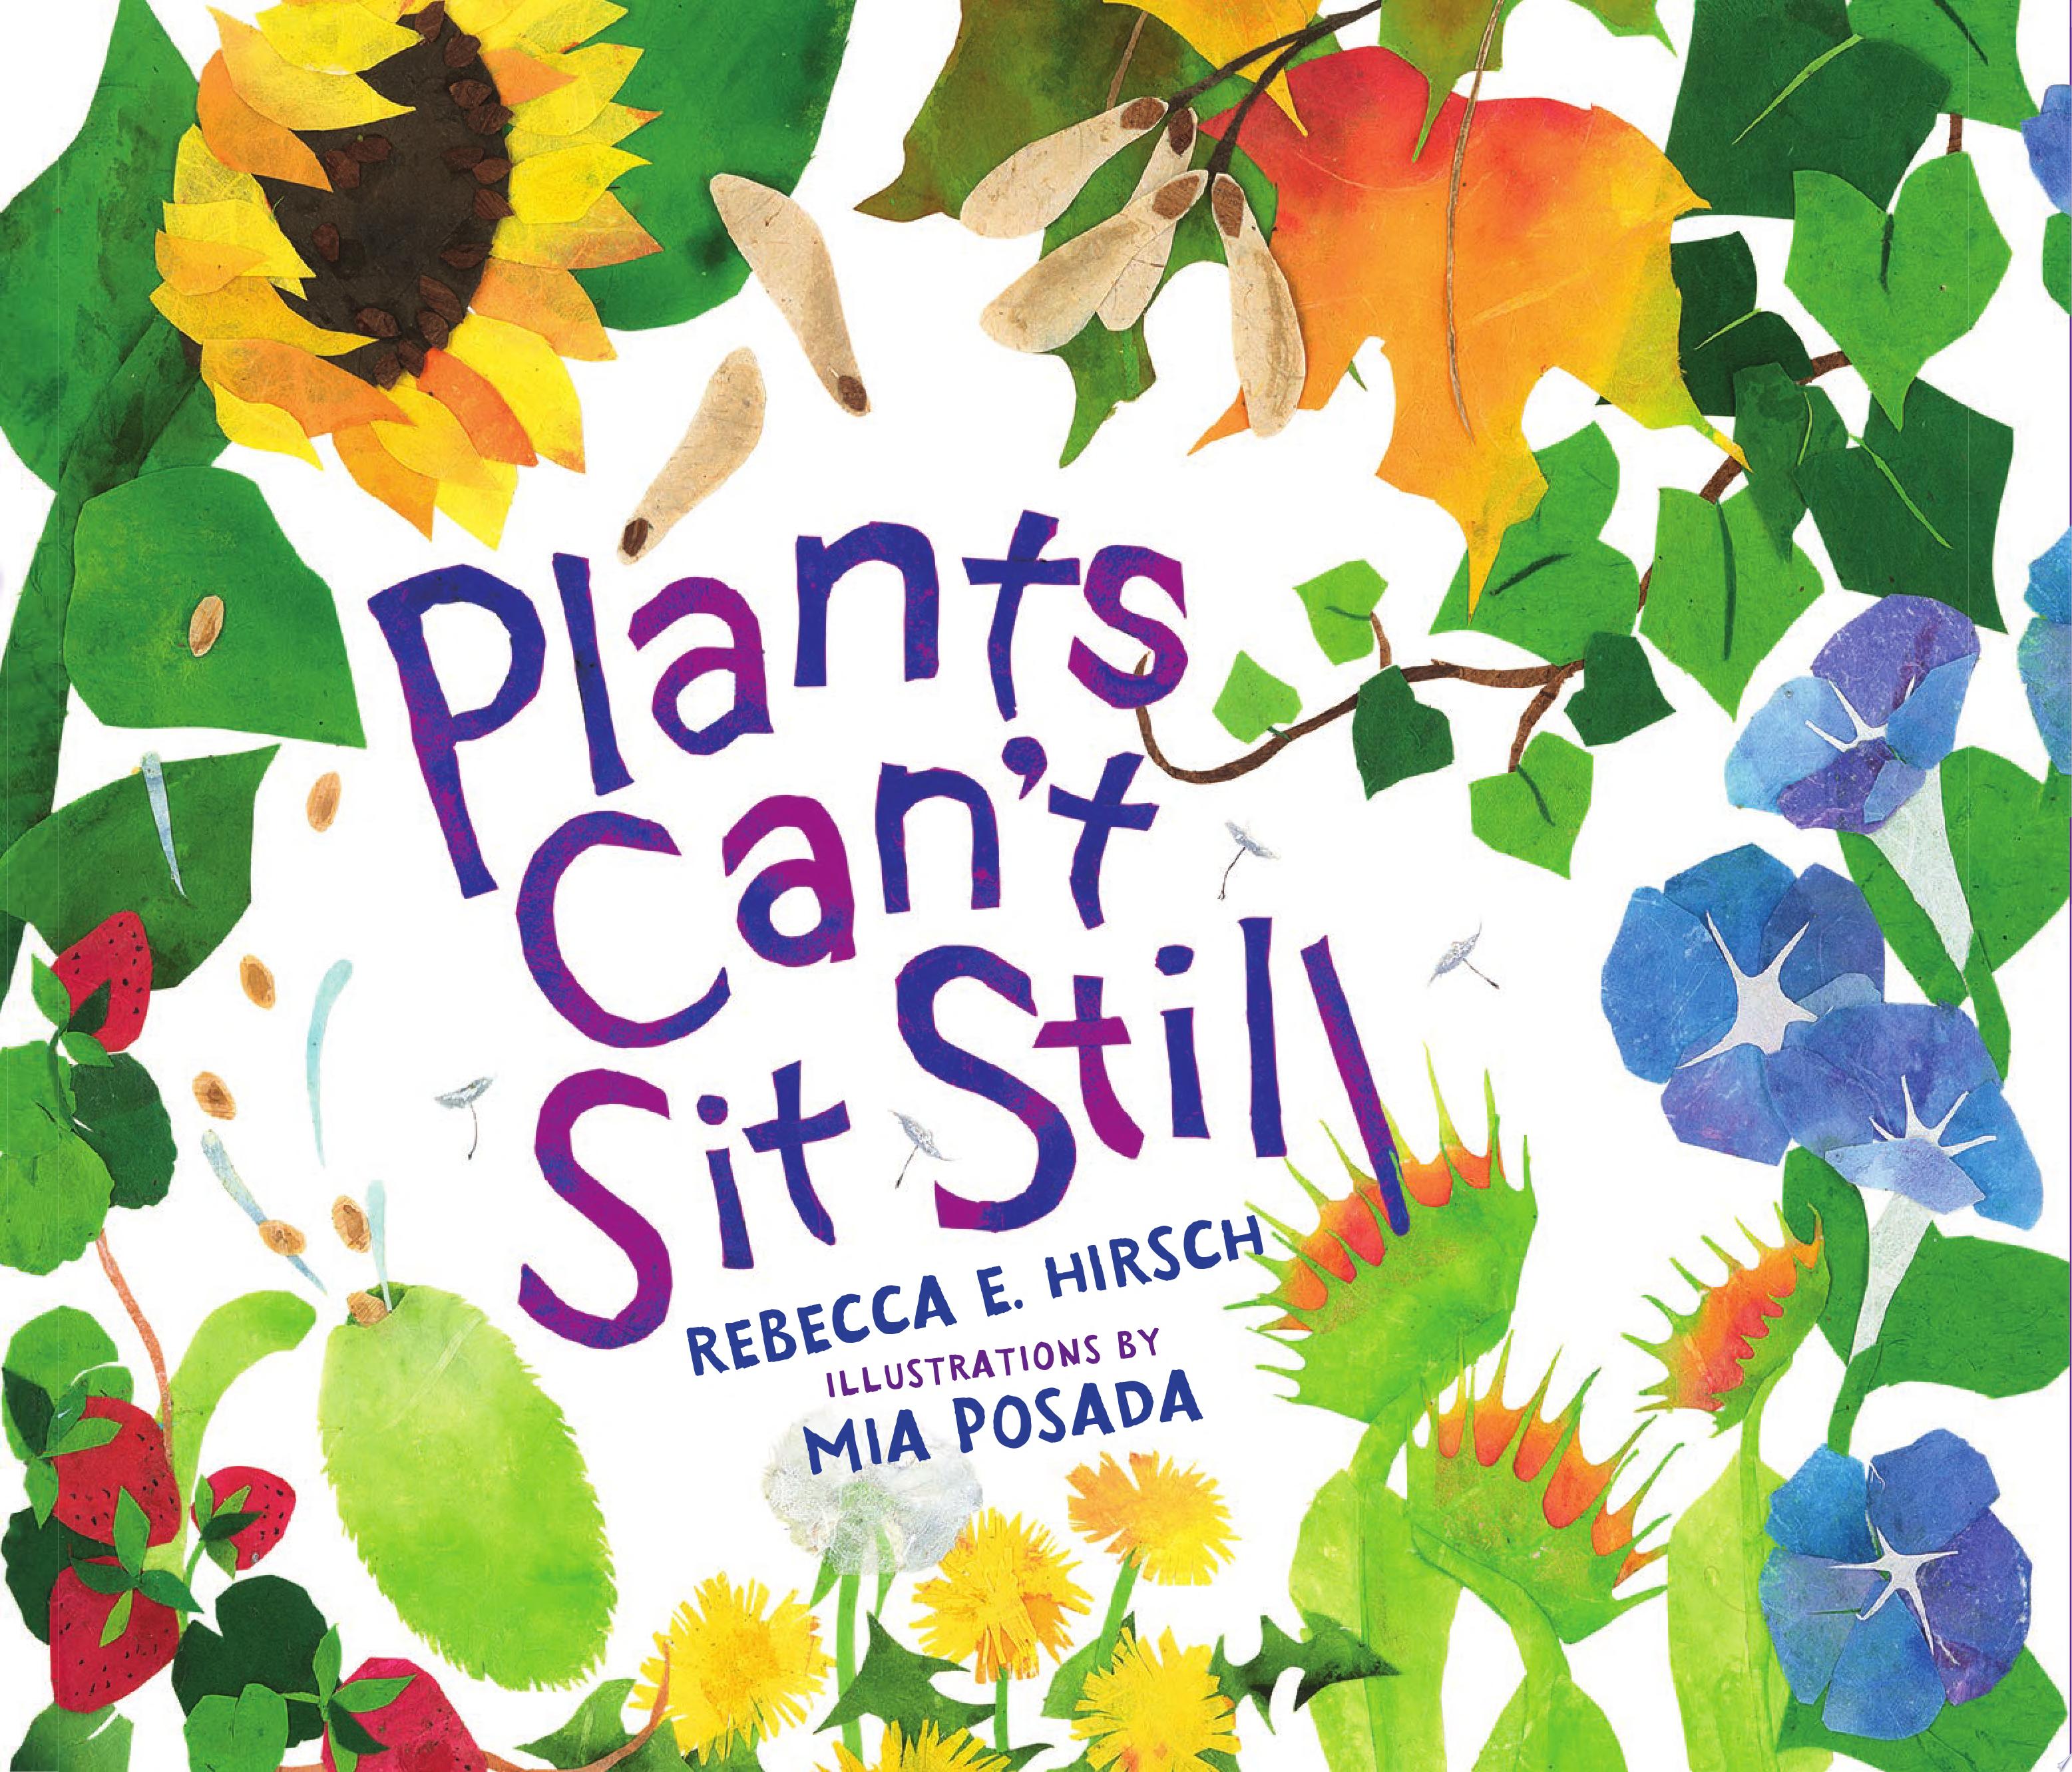 Image for "Plants Can't Sit Still"